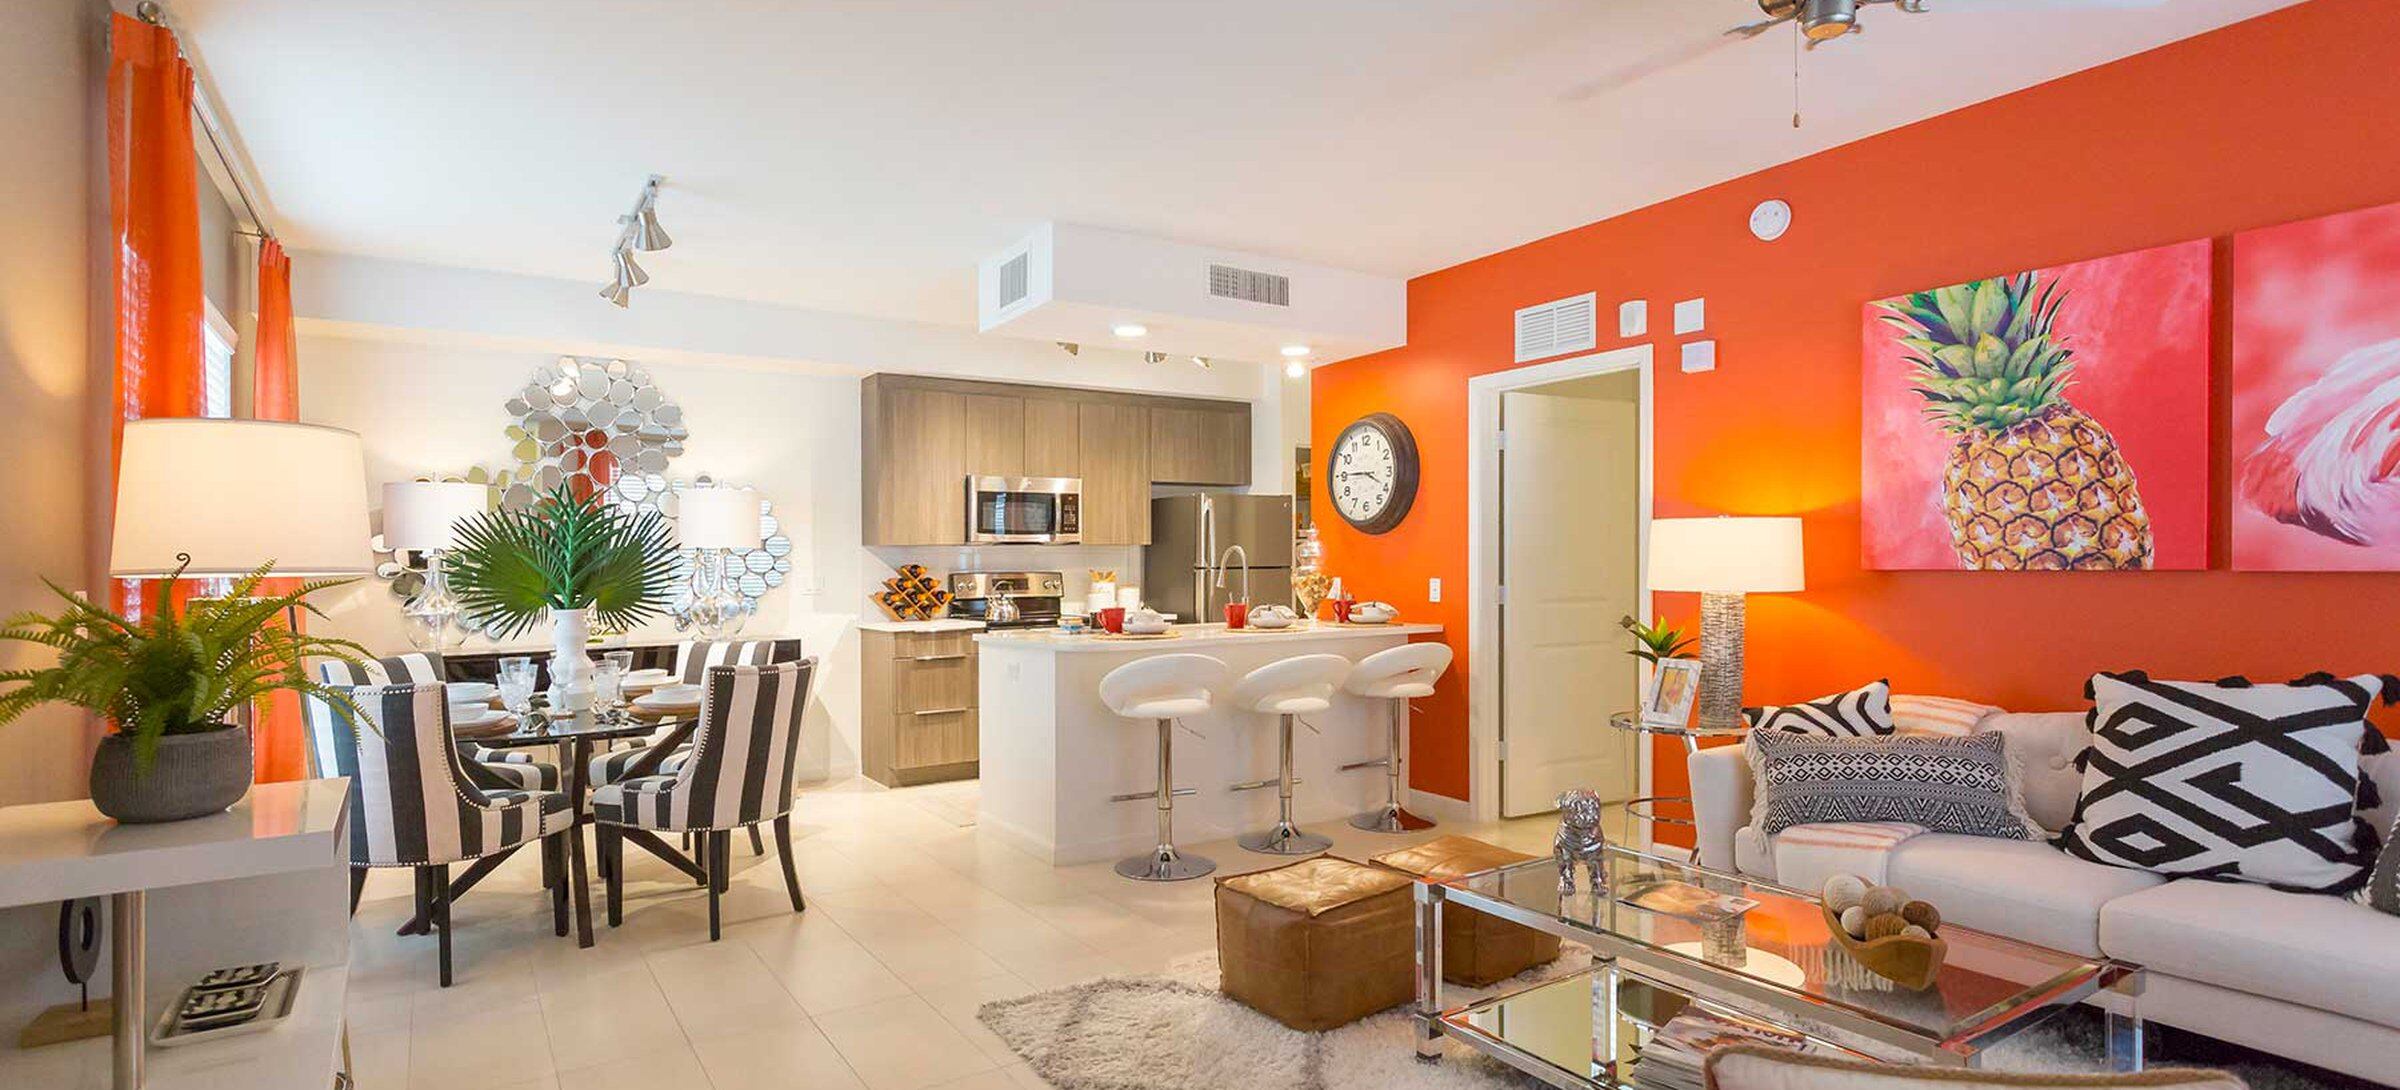 Living, dining and kitchen area